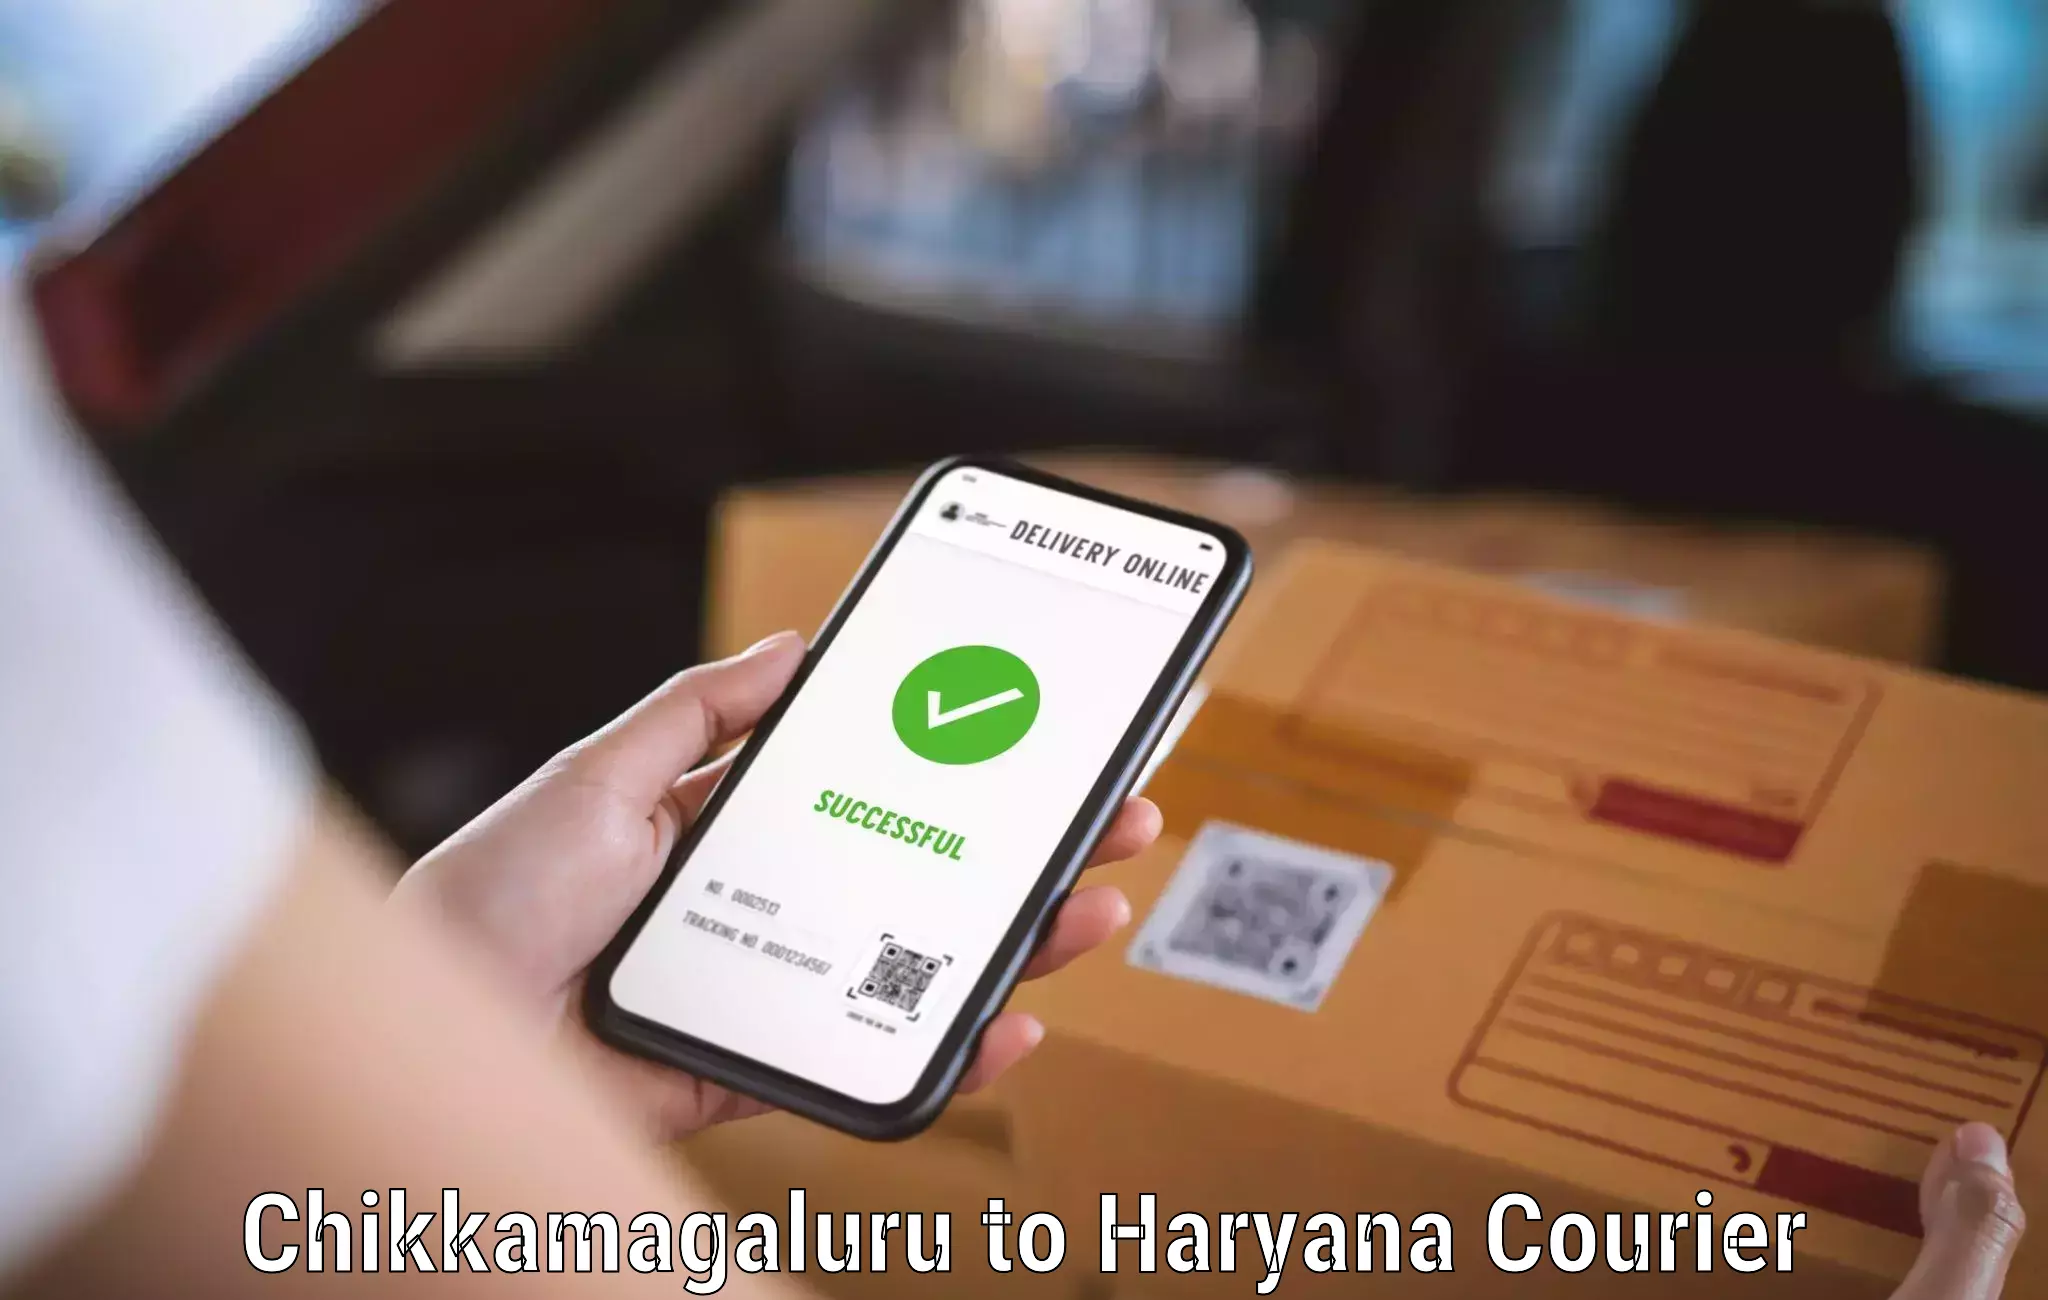 Same-day delivery solutions Chikkamagaluru to NCR Haryana